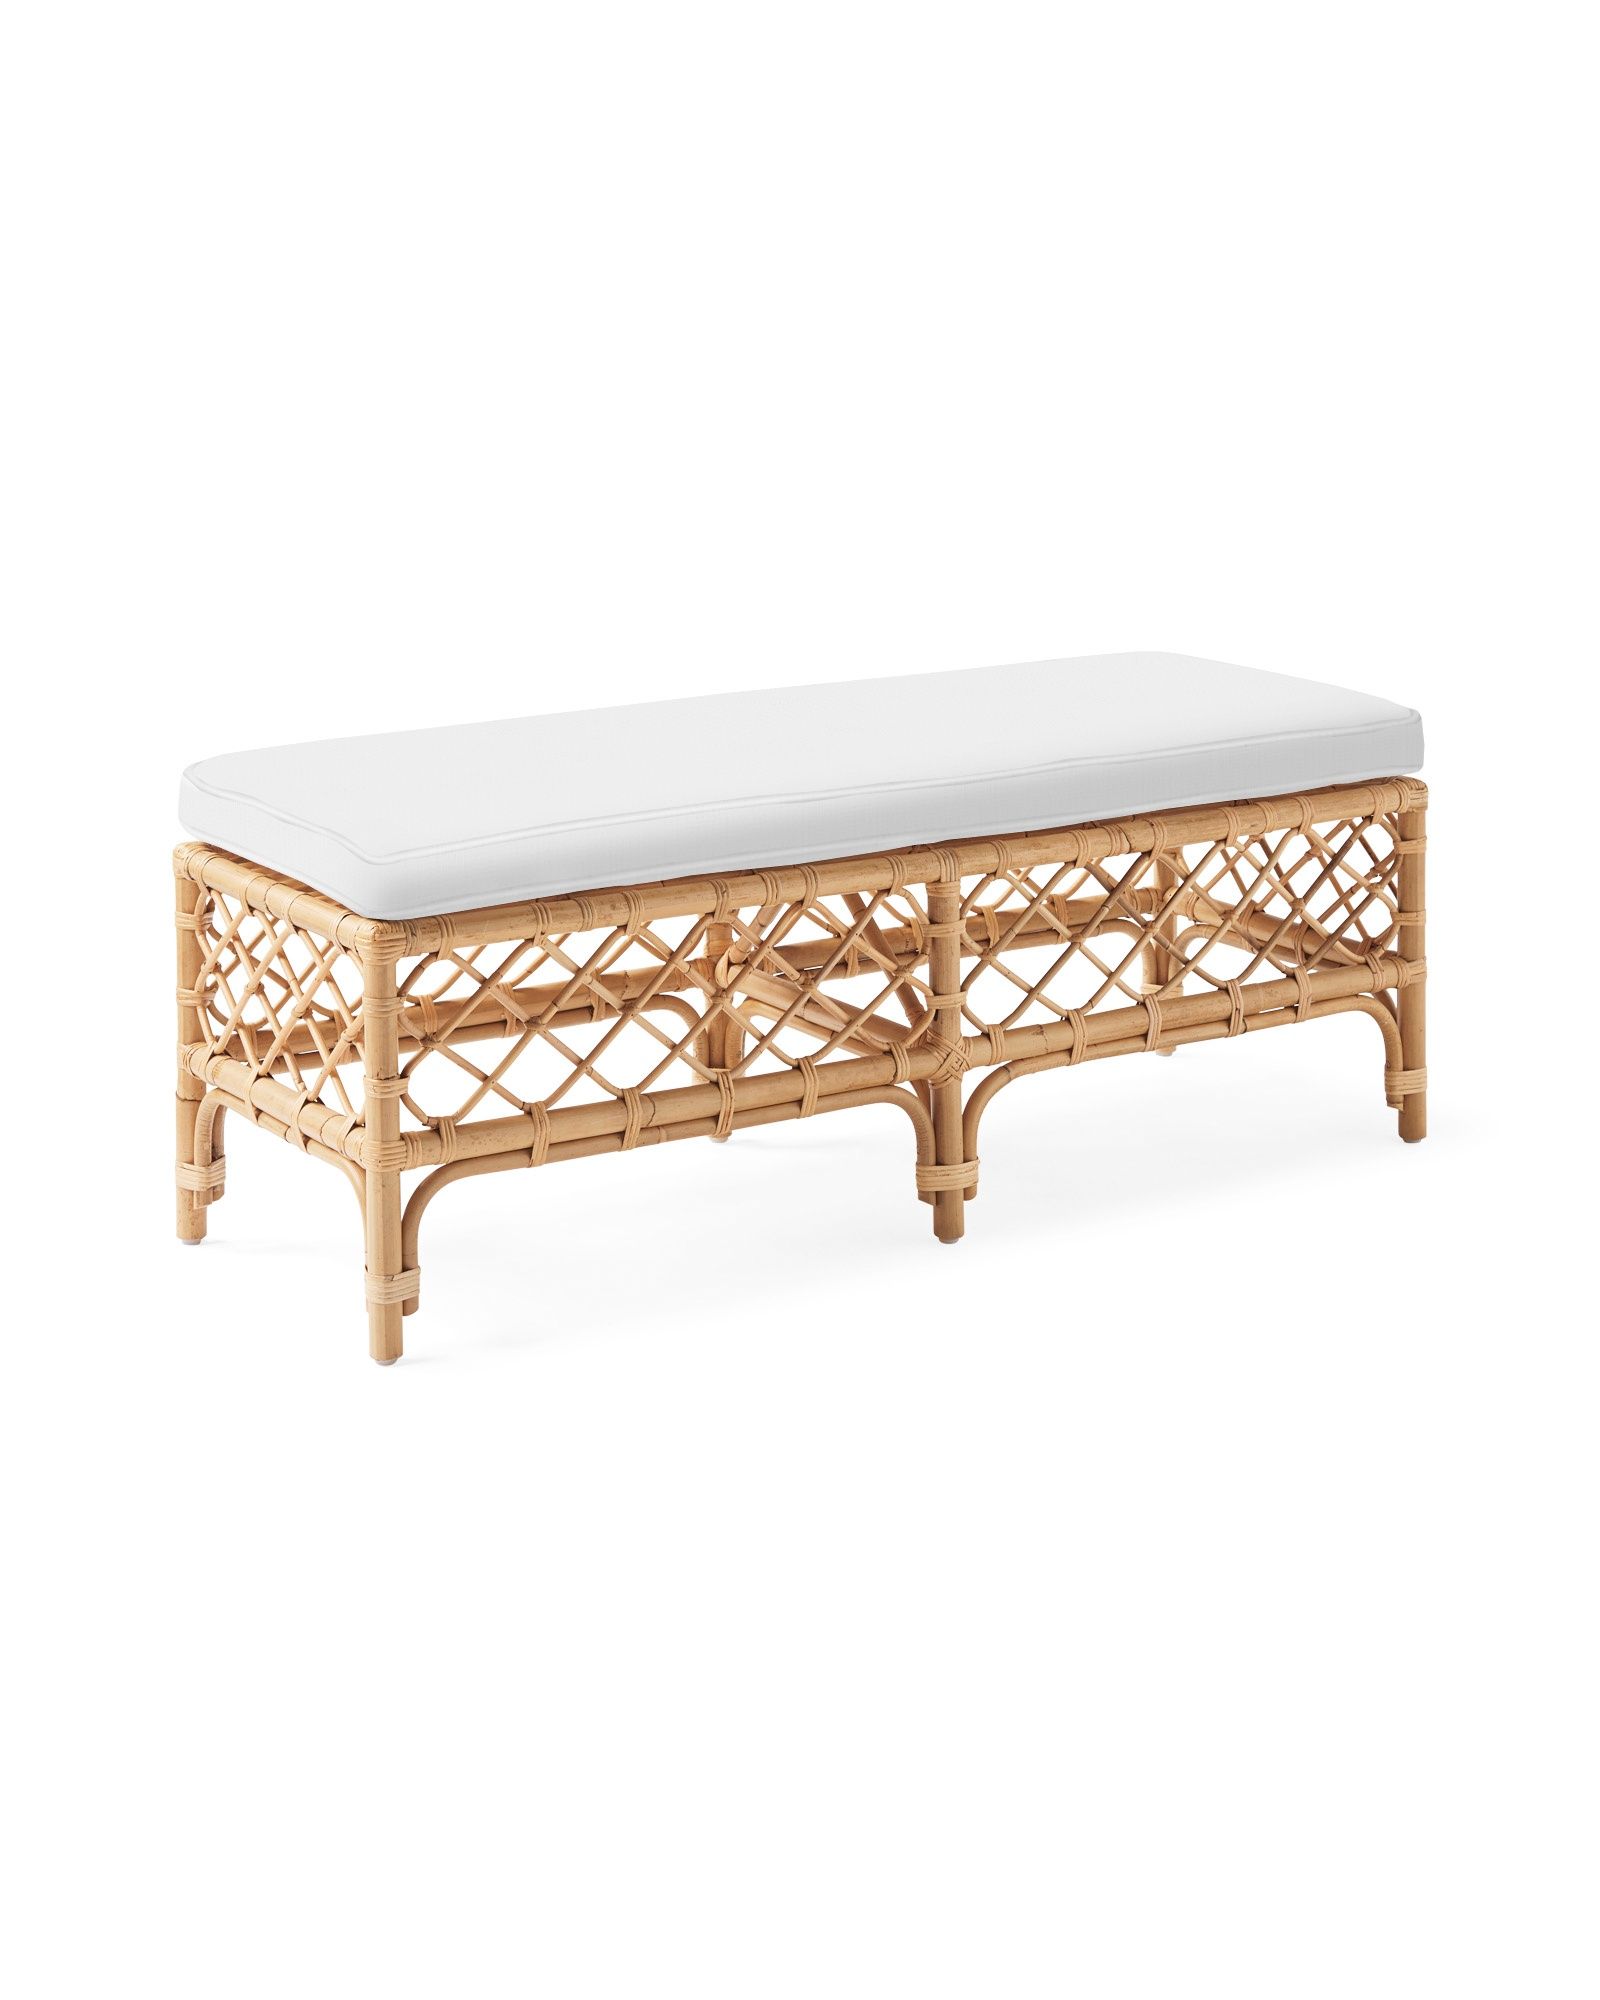 Avalon Bench | Serena and Lily